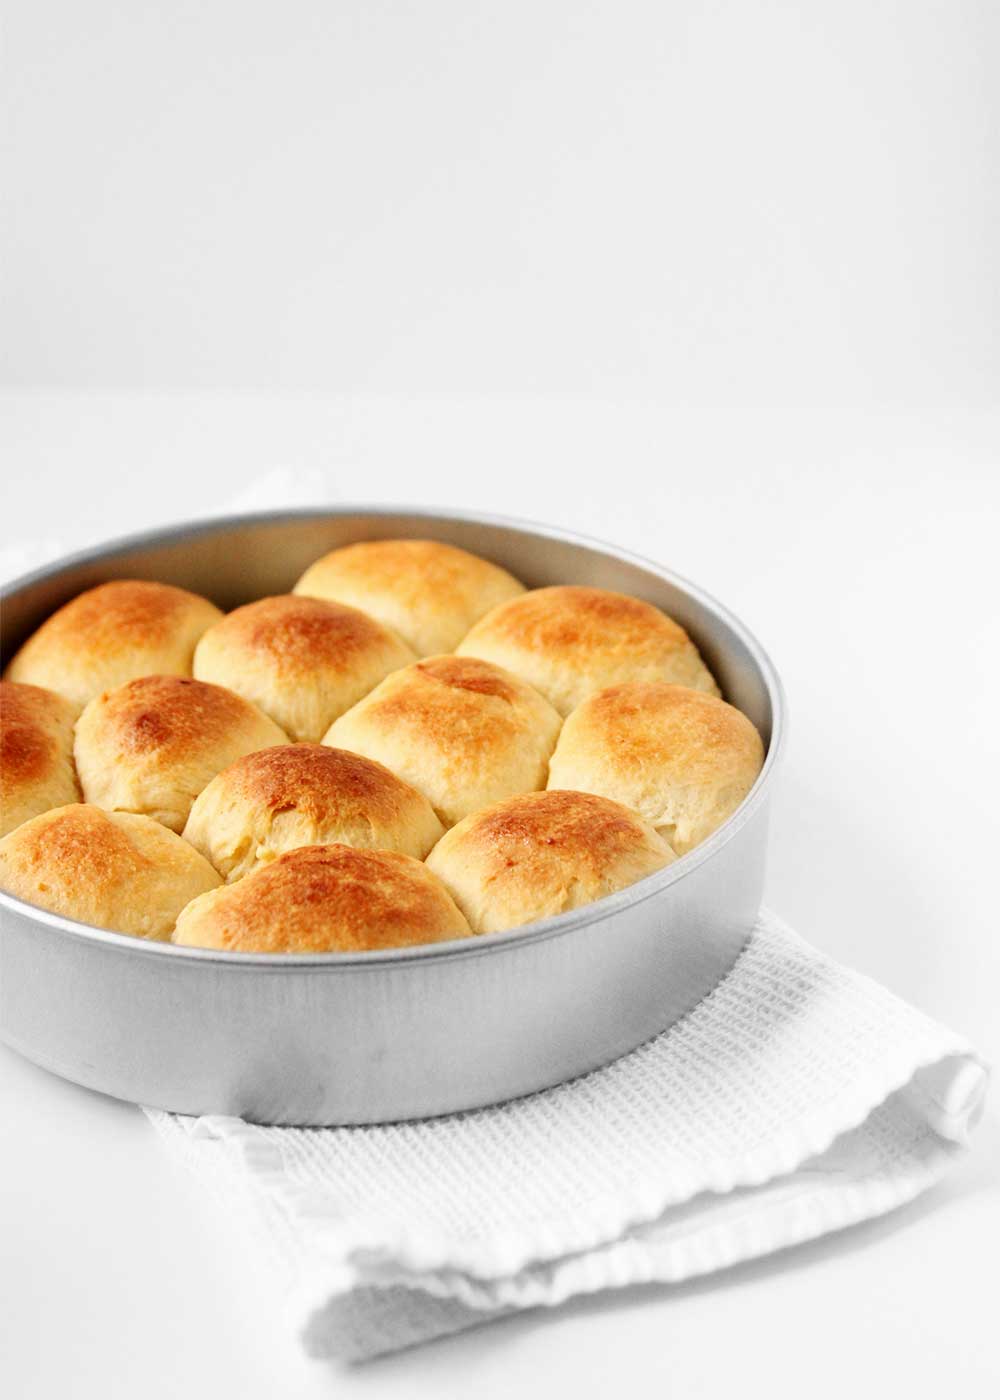 Make Ahead Wheat Rolls from the faux martha